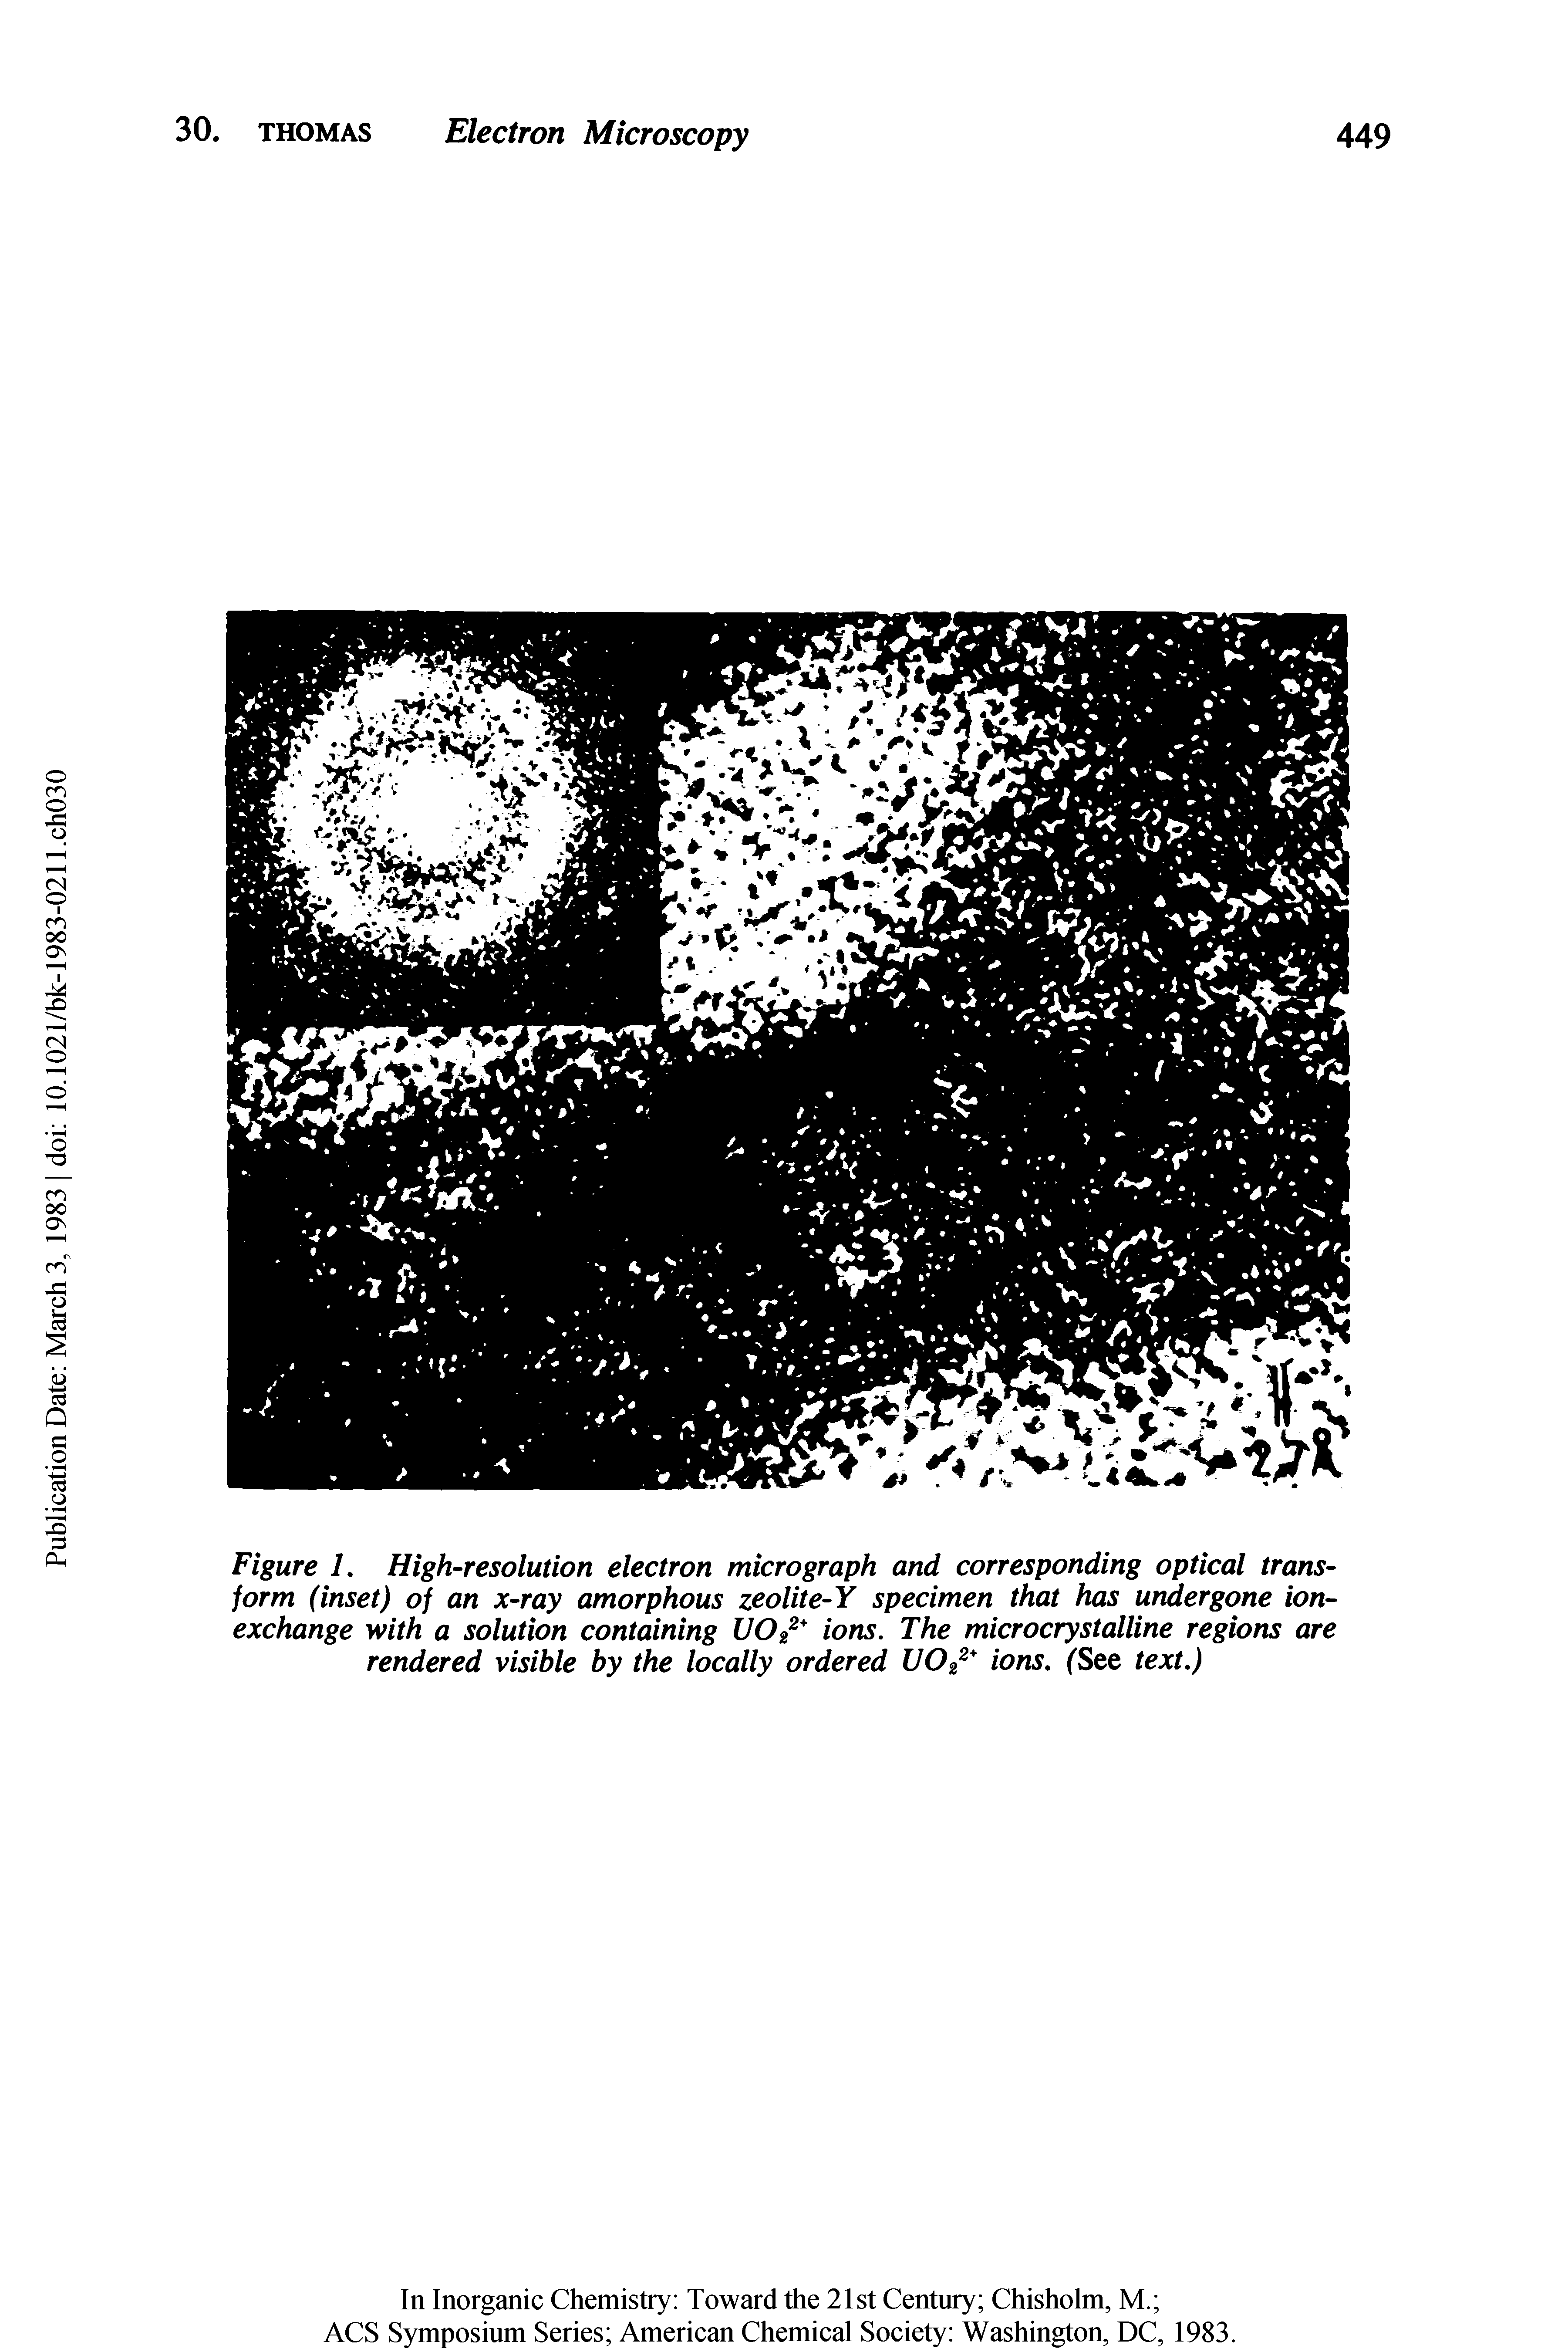 Figure 1. High-resolution electron micrograph and corresponding optical transform (inset) of an x-ray amorphous zeolite-Y specimen that has undergone ion-exchange with a solution containing U022+ ions. The microcrystalline regions are rendered visible by the locally ordered U022+ ions. ( See text.)...